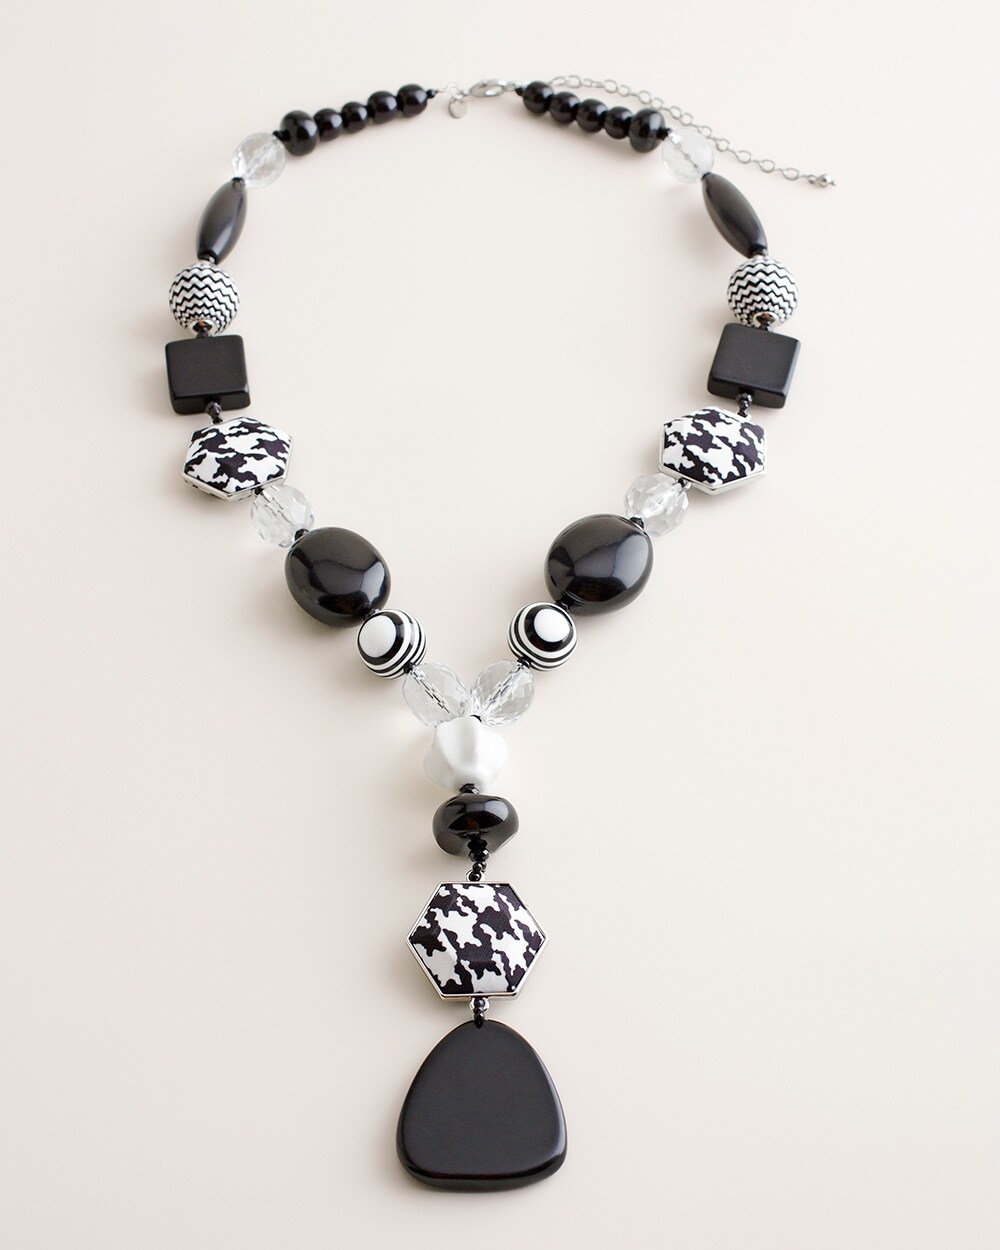 Black and White Printed Pendant Necklace